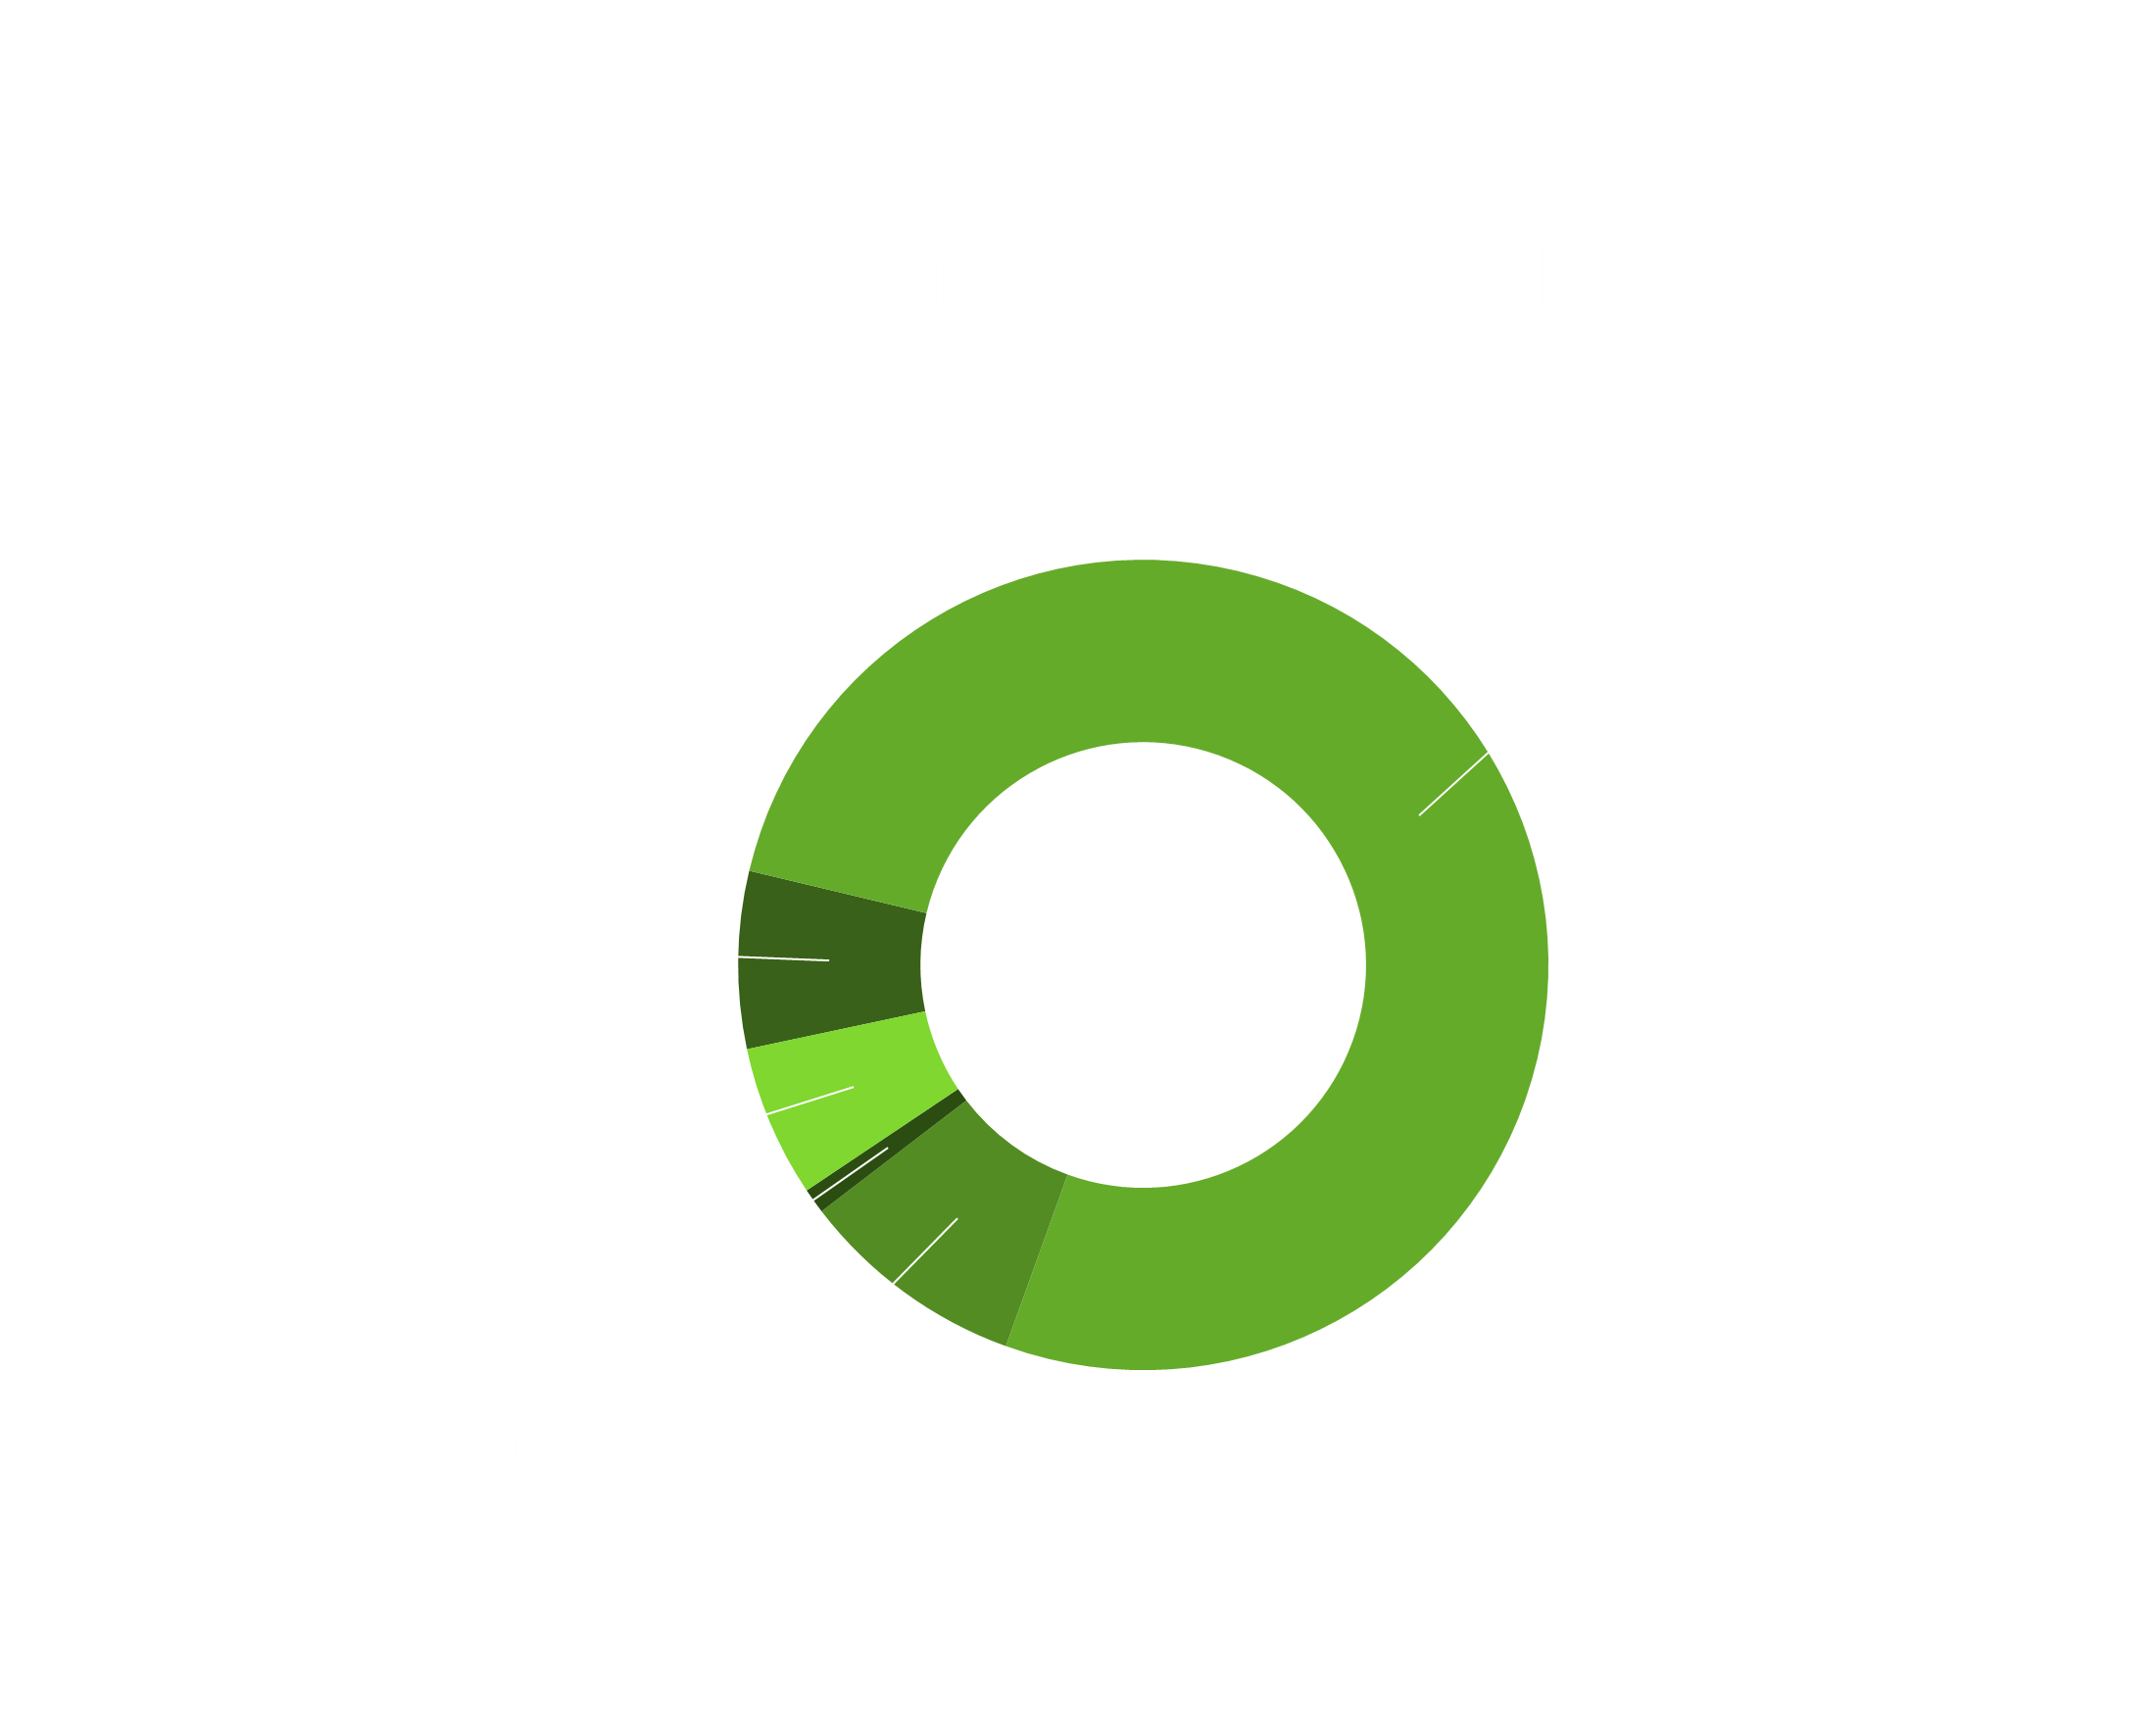 Transportation Fund Revenue chart, 76% from motor fuel or spcial fuel tax, 9% from motor vehicle registration, 7% from permits and fees, 6% from General Funds, and 1% from Interest/Other.